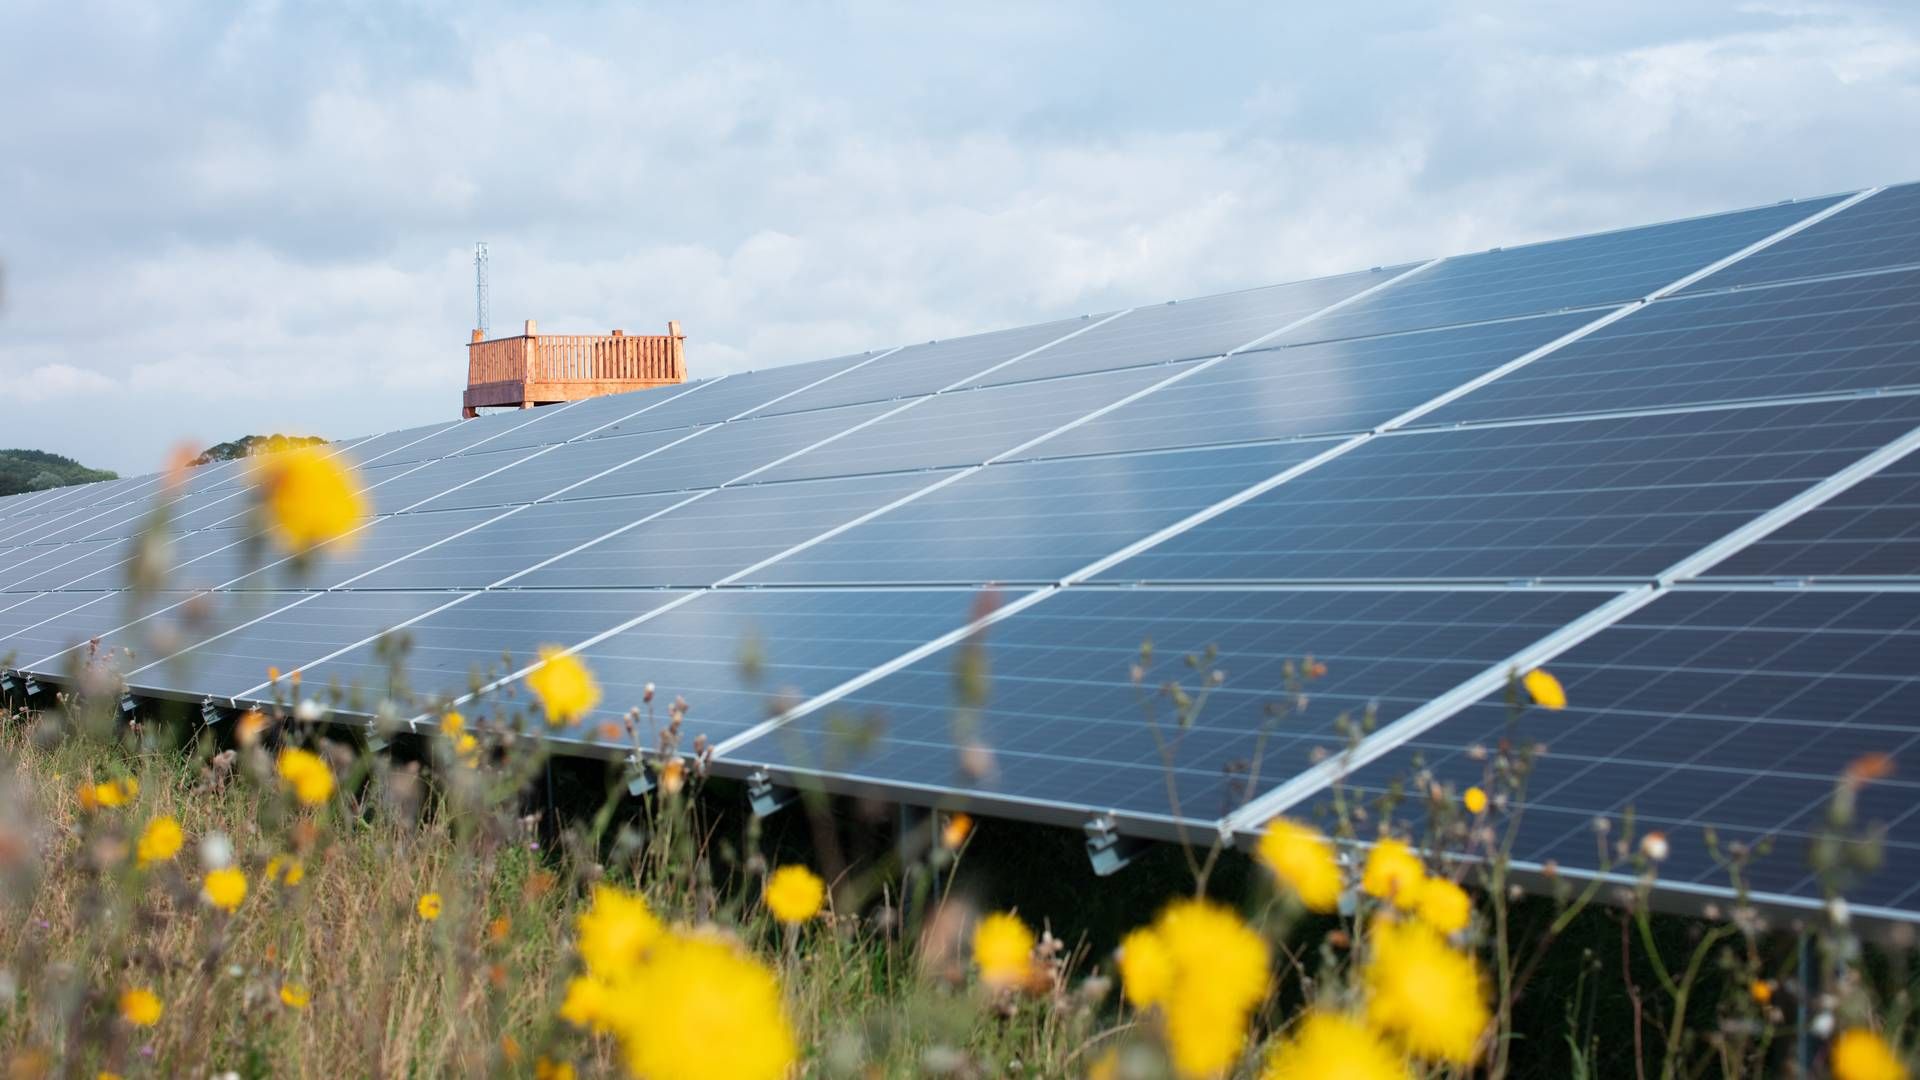 "Better Energy has proven that they are able to develop, build and connect to the grid some of Poland's largest solar farms," says Helle Ærendahl Heldbo, head of alternative investments. | Photo: Better Energy